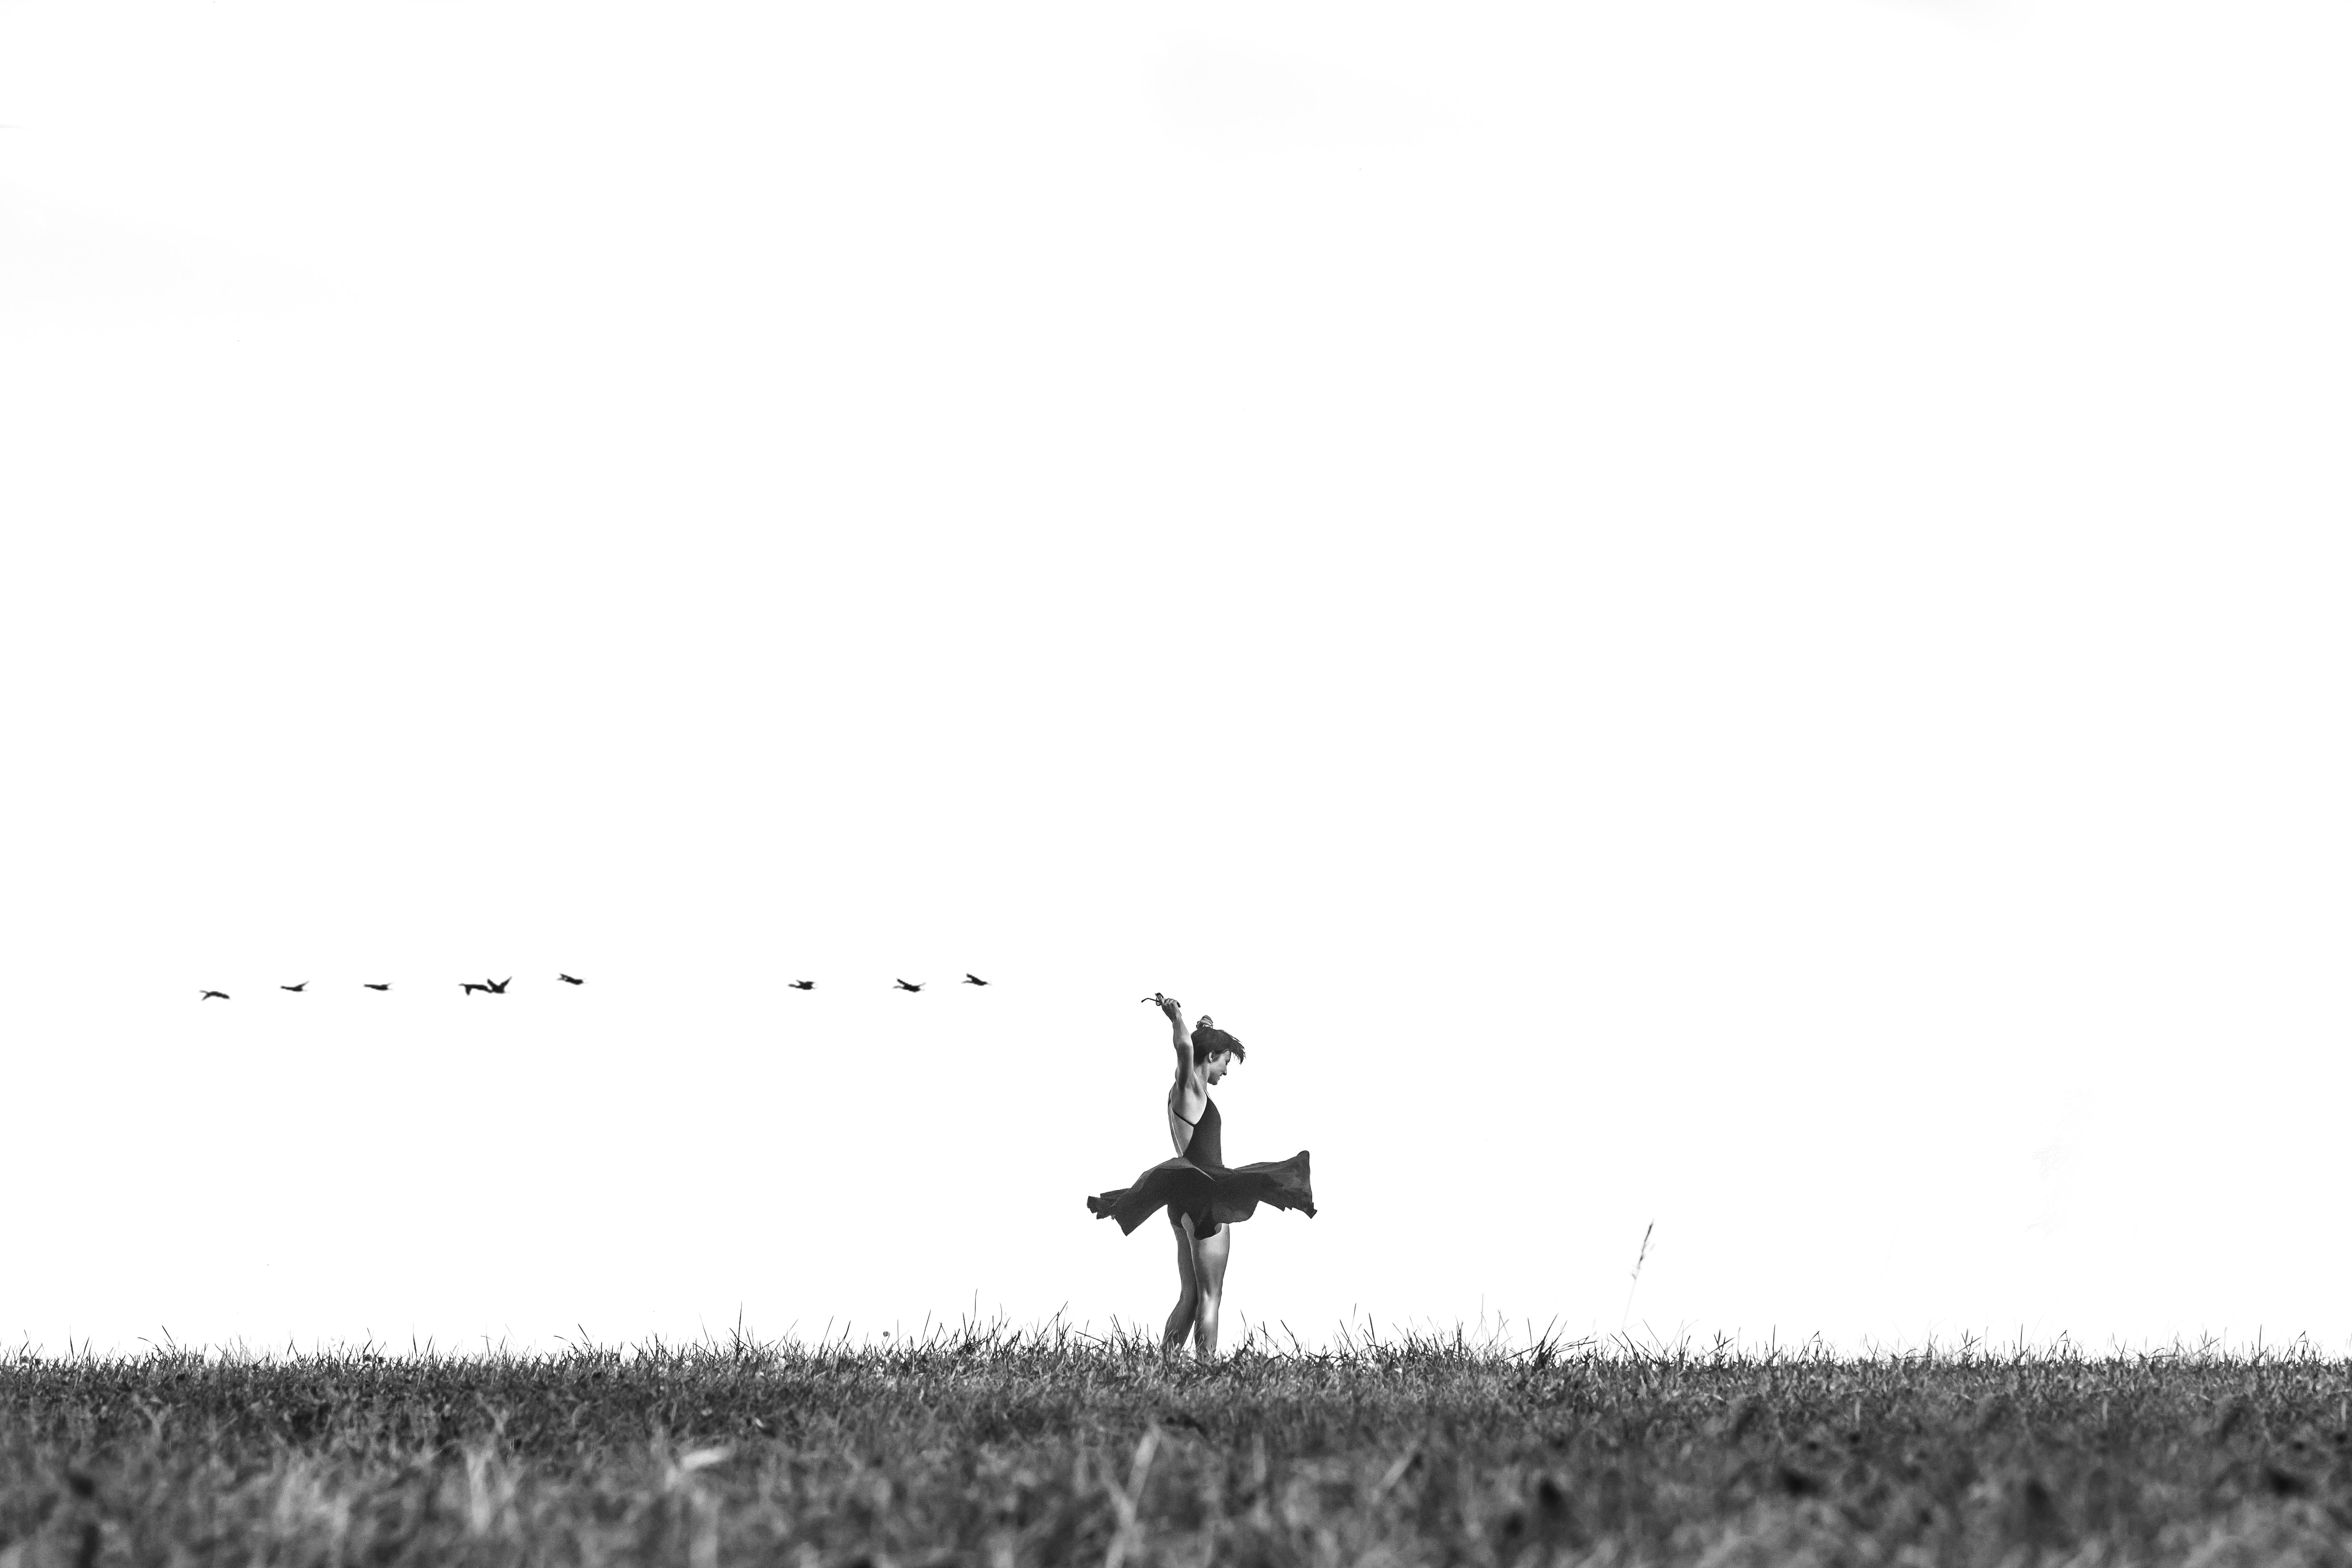 greyscale photo of person standing on green grass during daytime